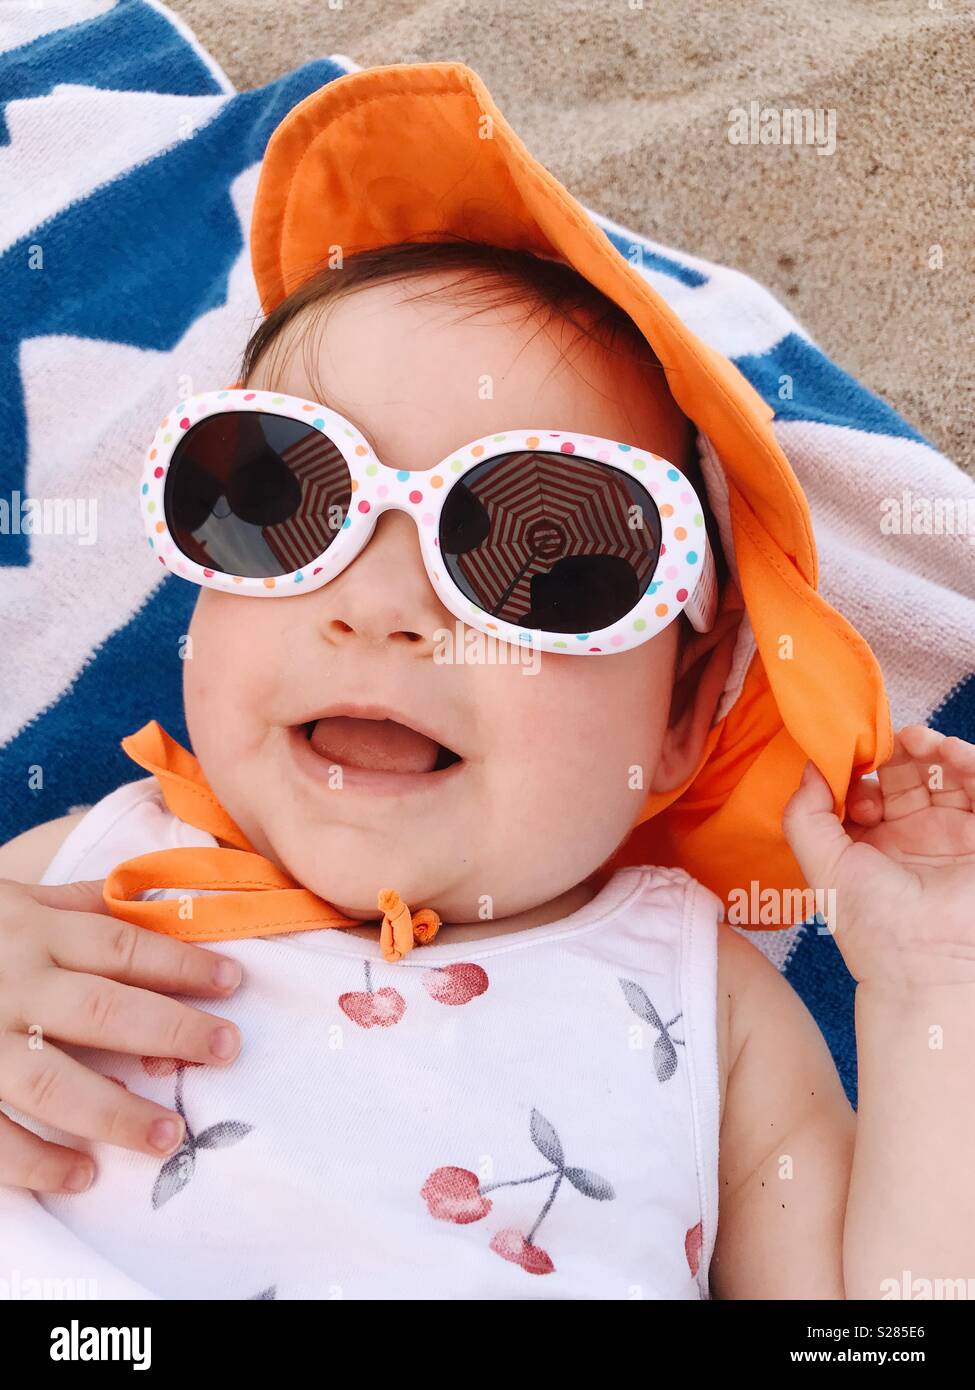 A young baby girl wearing sunglasses on the beach in Connecticut, USA. Stock Photo